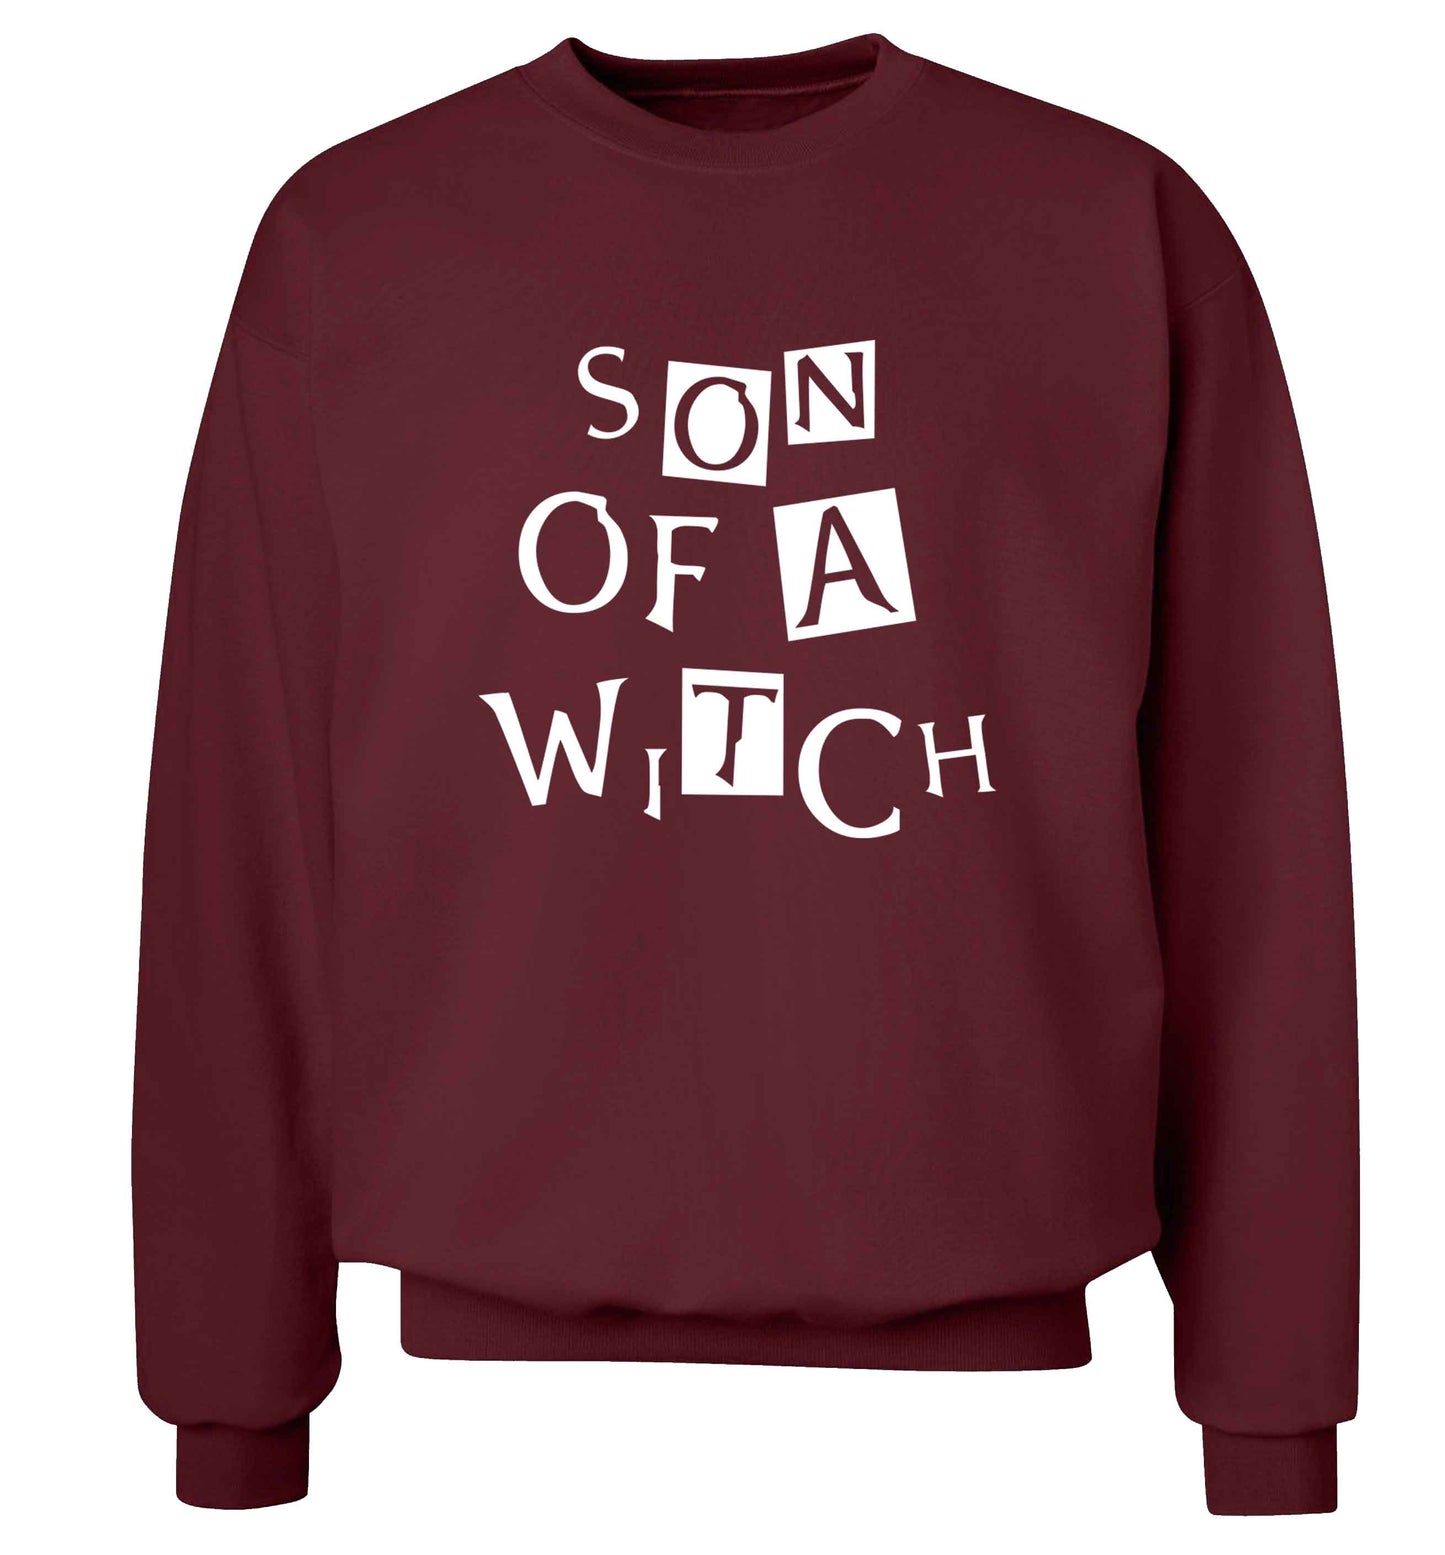 Son of a witch adult's unisex maroon sweater 2XL